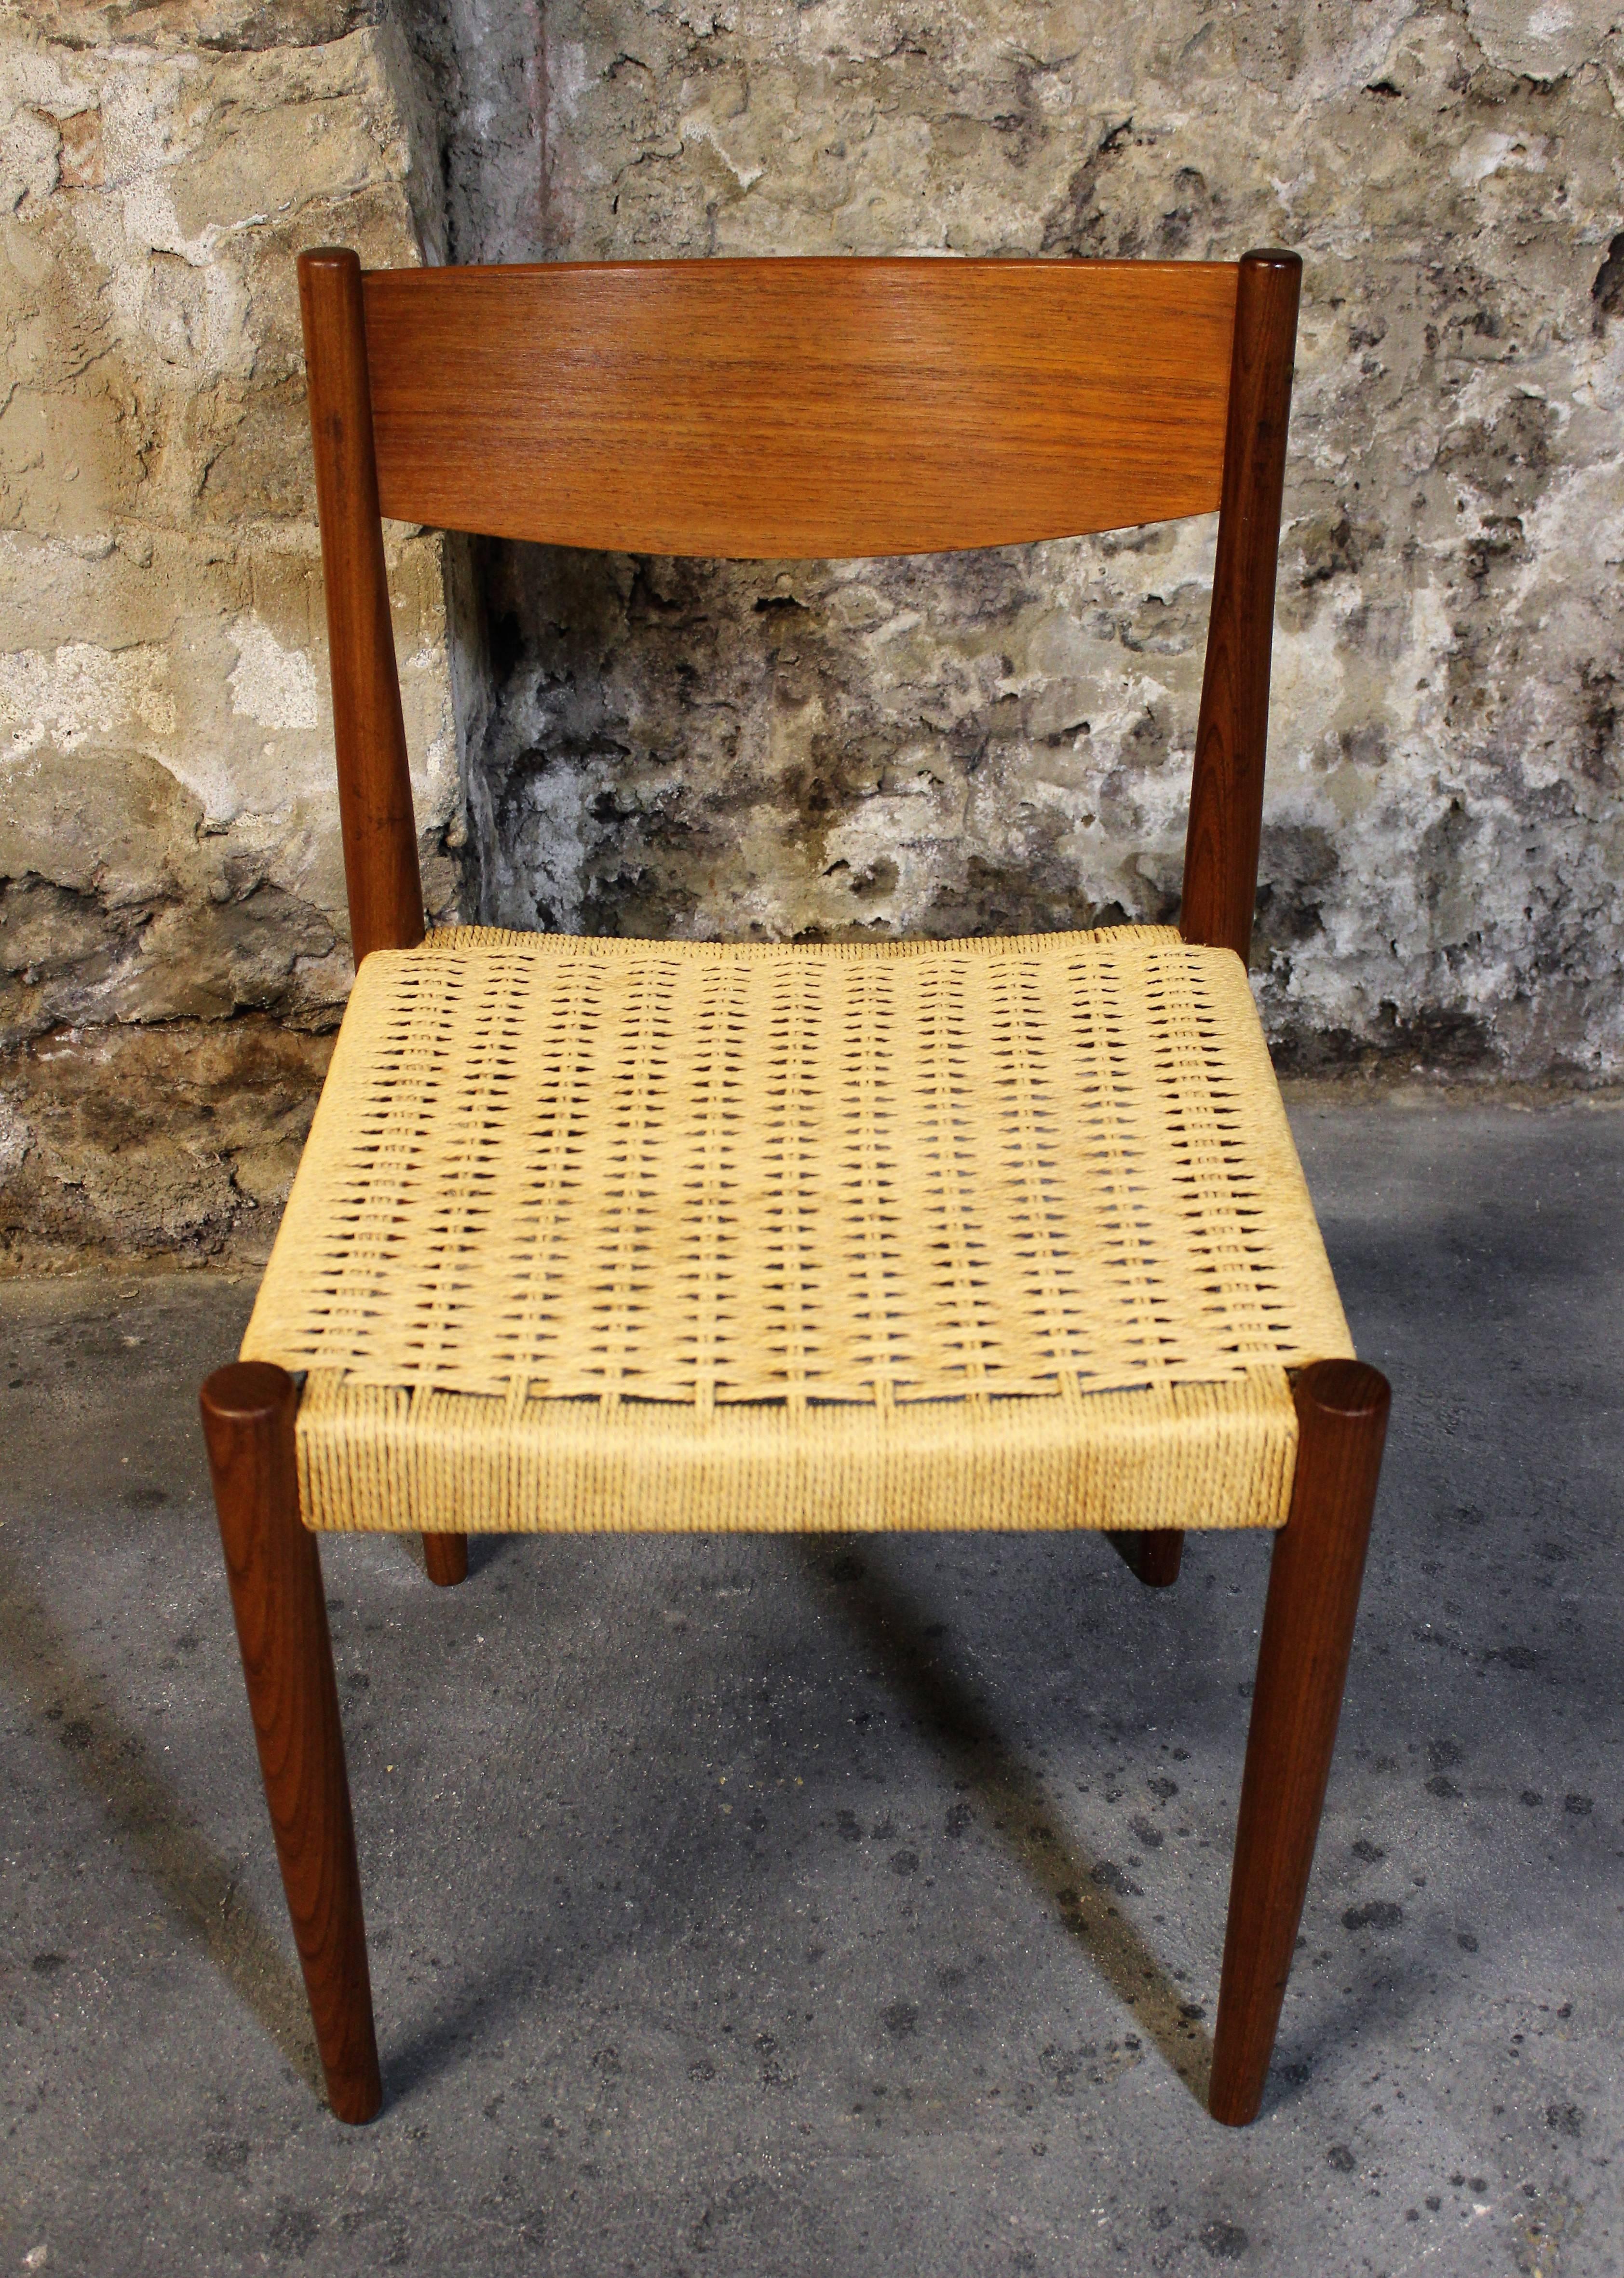 Four Poul Volther for Frem Rojle Danish teak woven cord dining chairs. We also have an additional four of these same chairs finished in fabric and not rope.

Mid-Century Modern / Scandinavian Modern